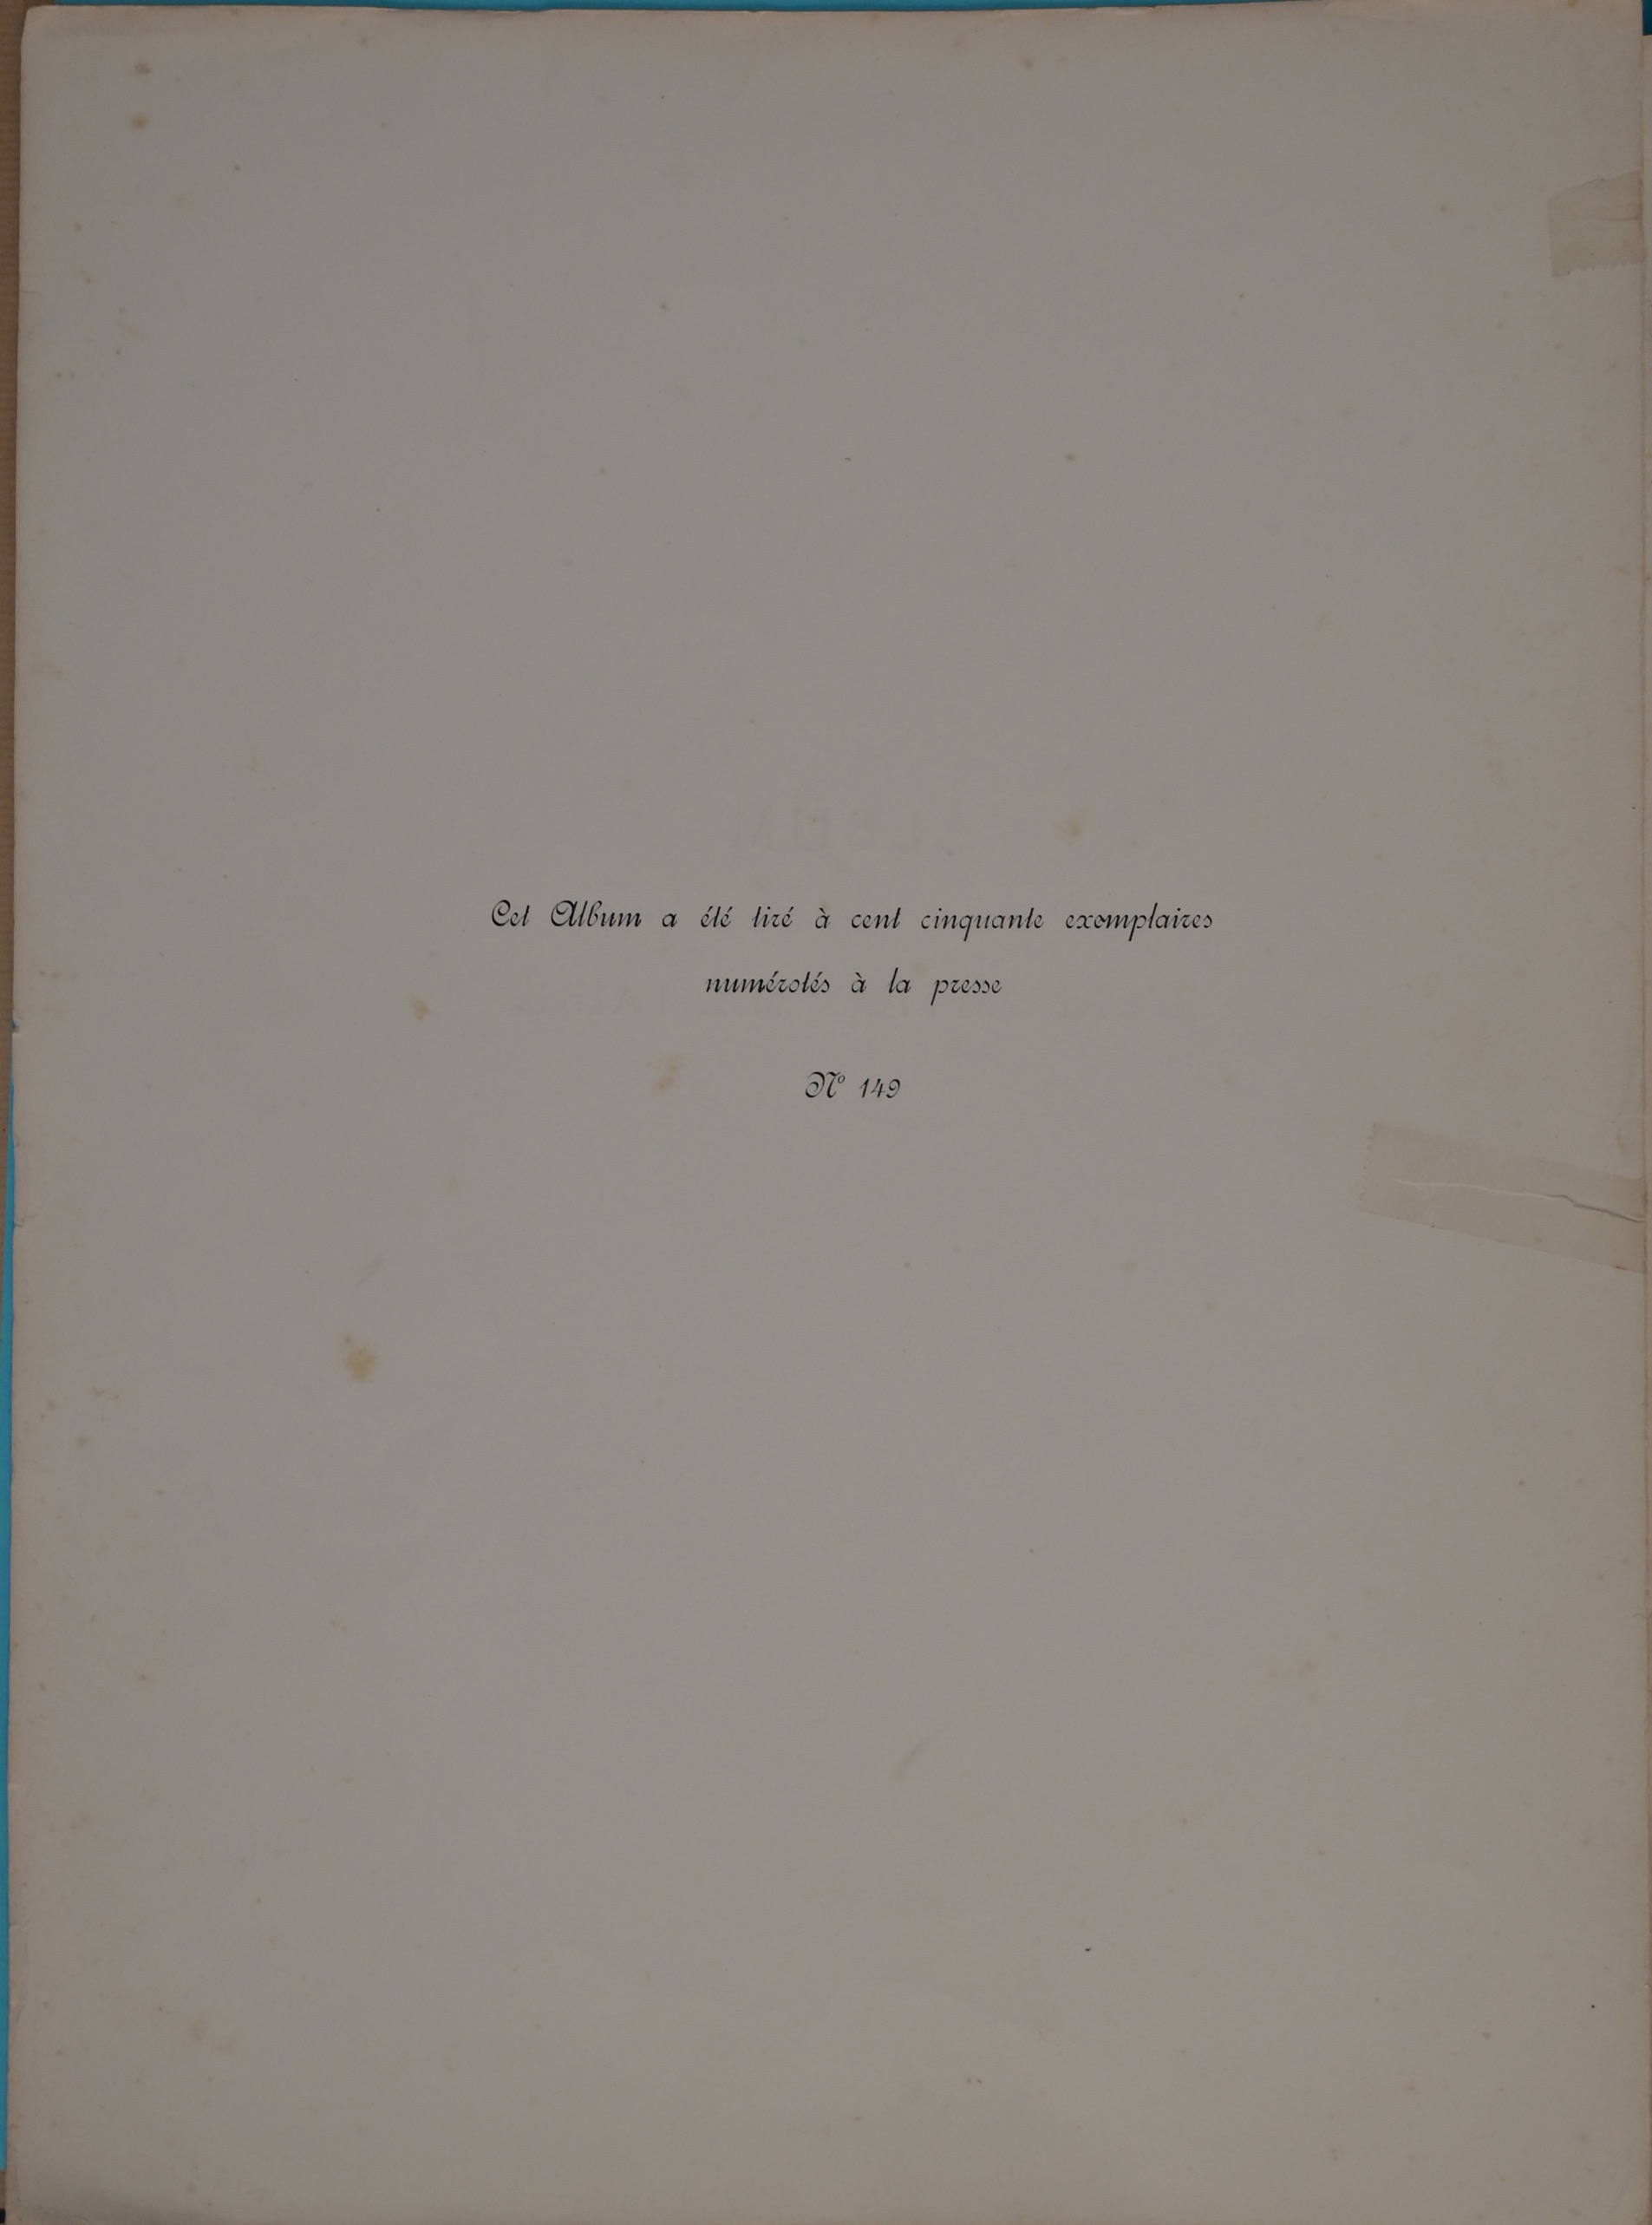 Album of the Military Exhibition of the Society of Friends of the Arts of Strasbourg. 1904. - Image 5 of 19